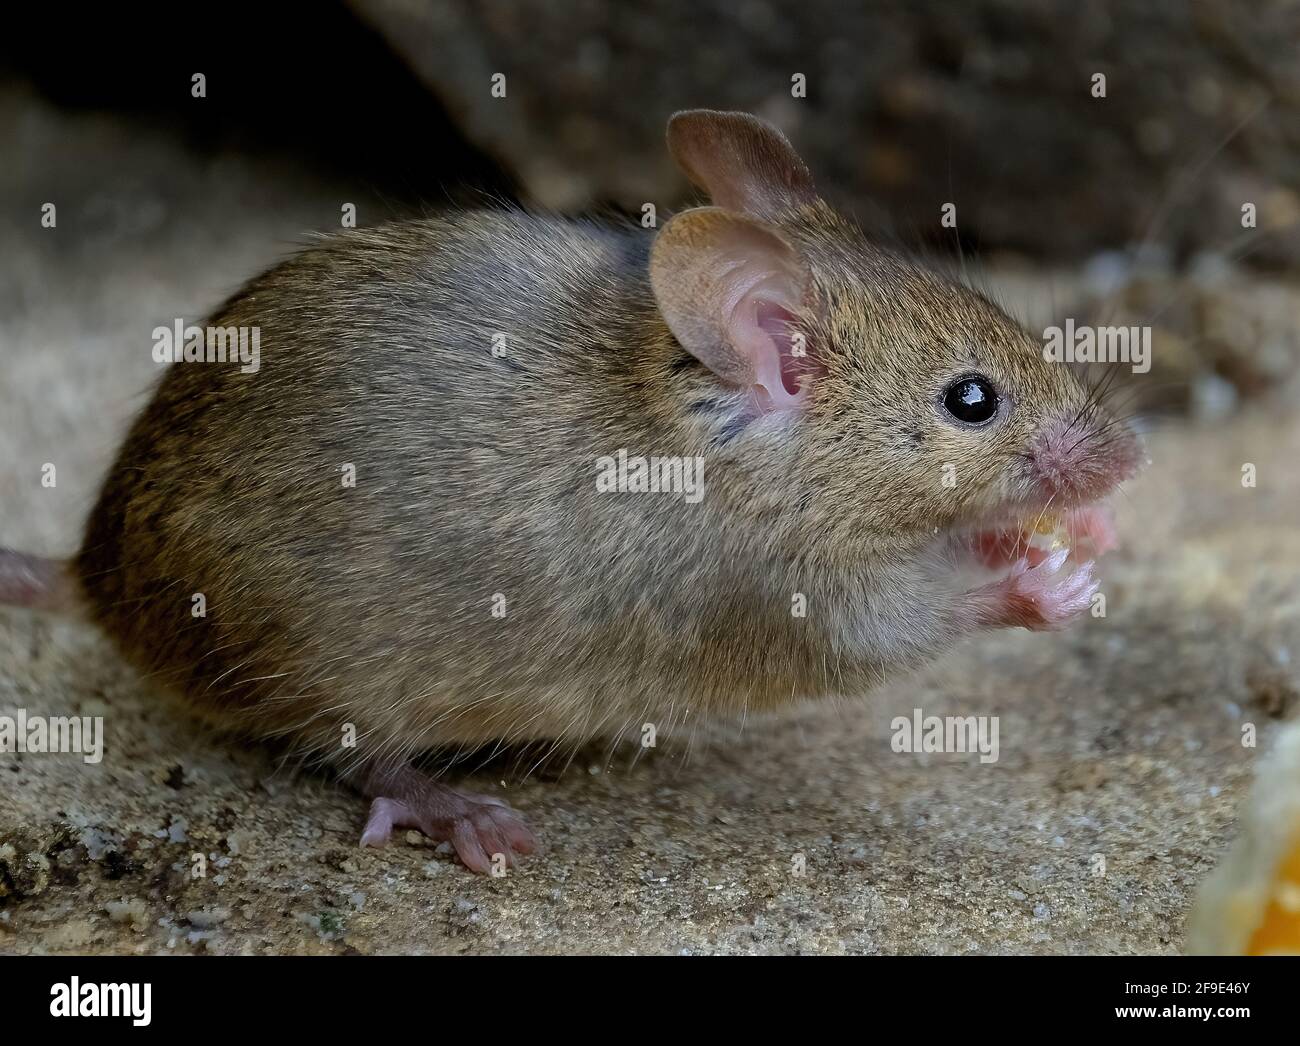 The house mouse is a small mammal of the order Rodentia, characteristically having a pointed snout, large rounded ears, and a long and hairy tail. Stock Photo